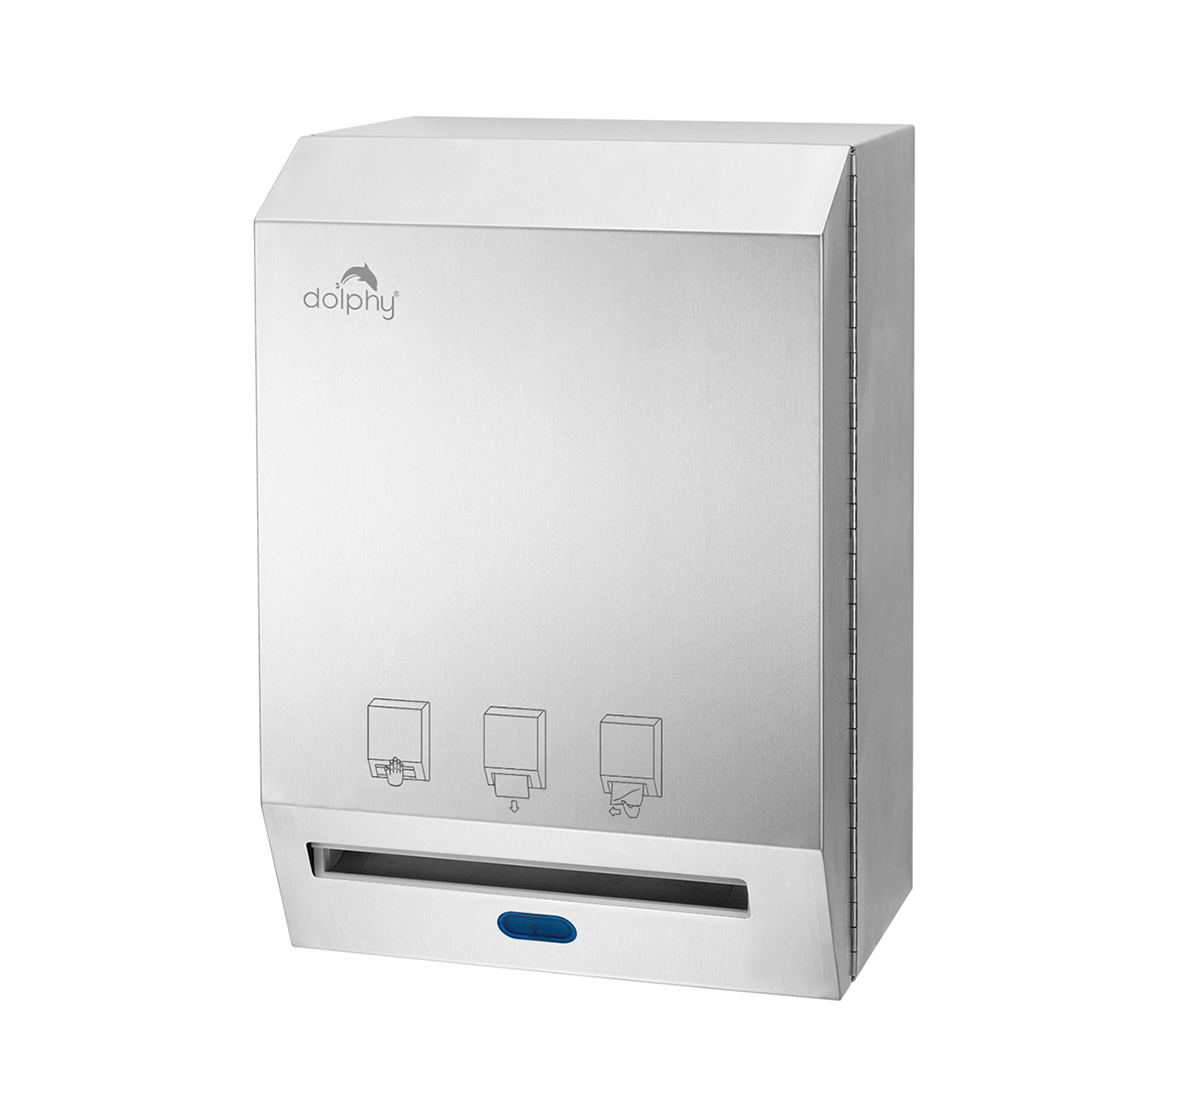 Stainless Steel Auto Roll Towel Dispenser
